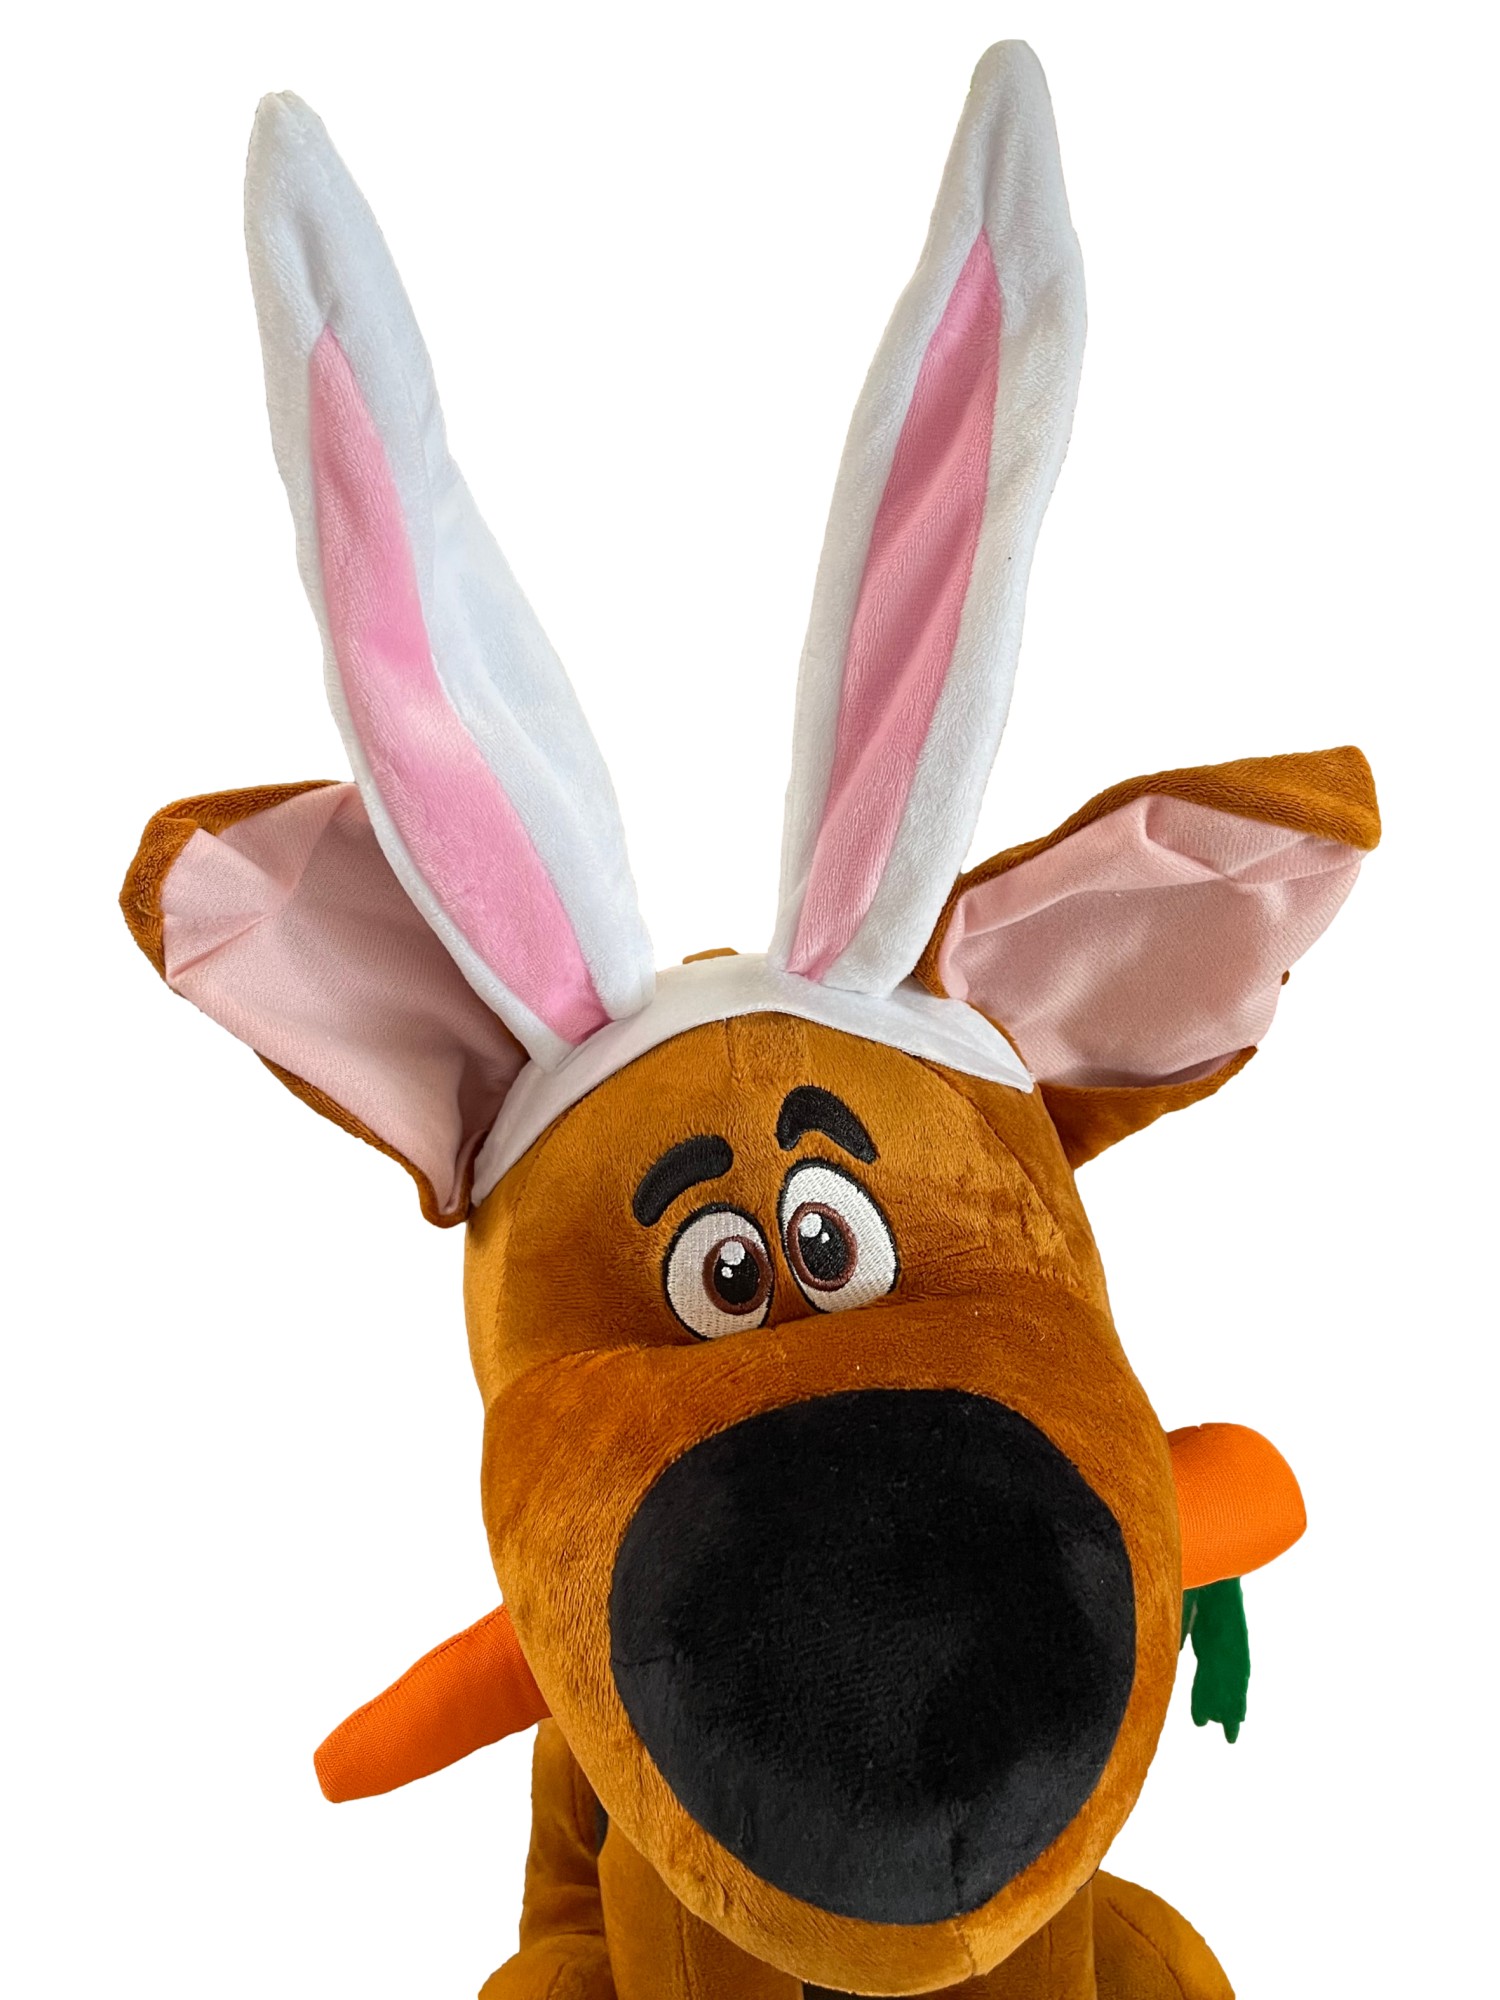 Scooby-Doo Large Scooby-Doo Easter Plush 20" Puppy Dog Stuffed Animal Pal